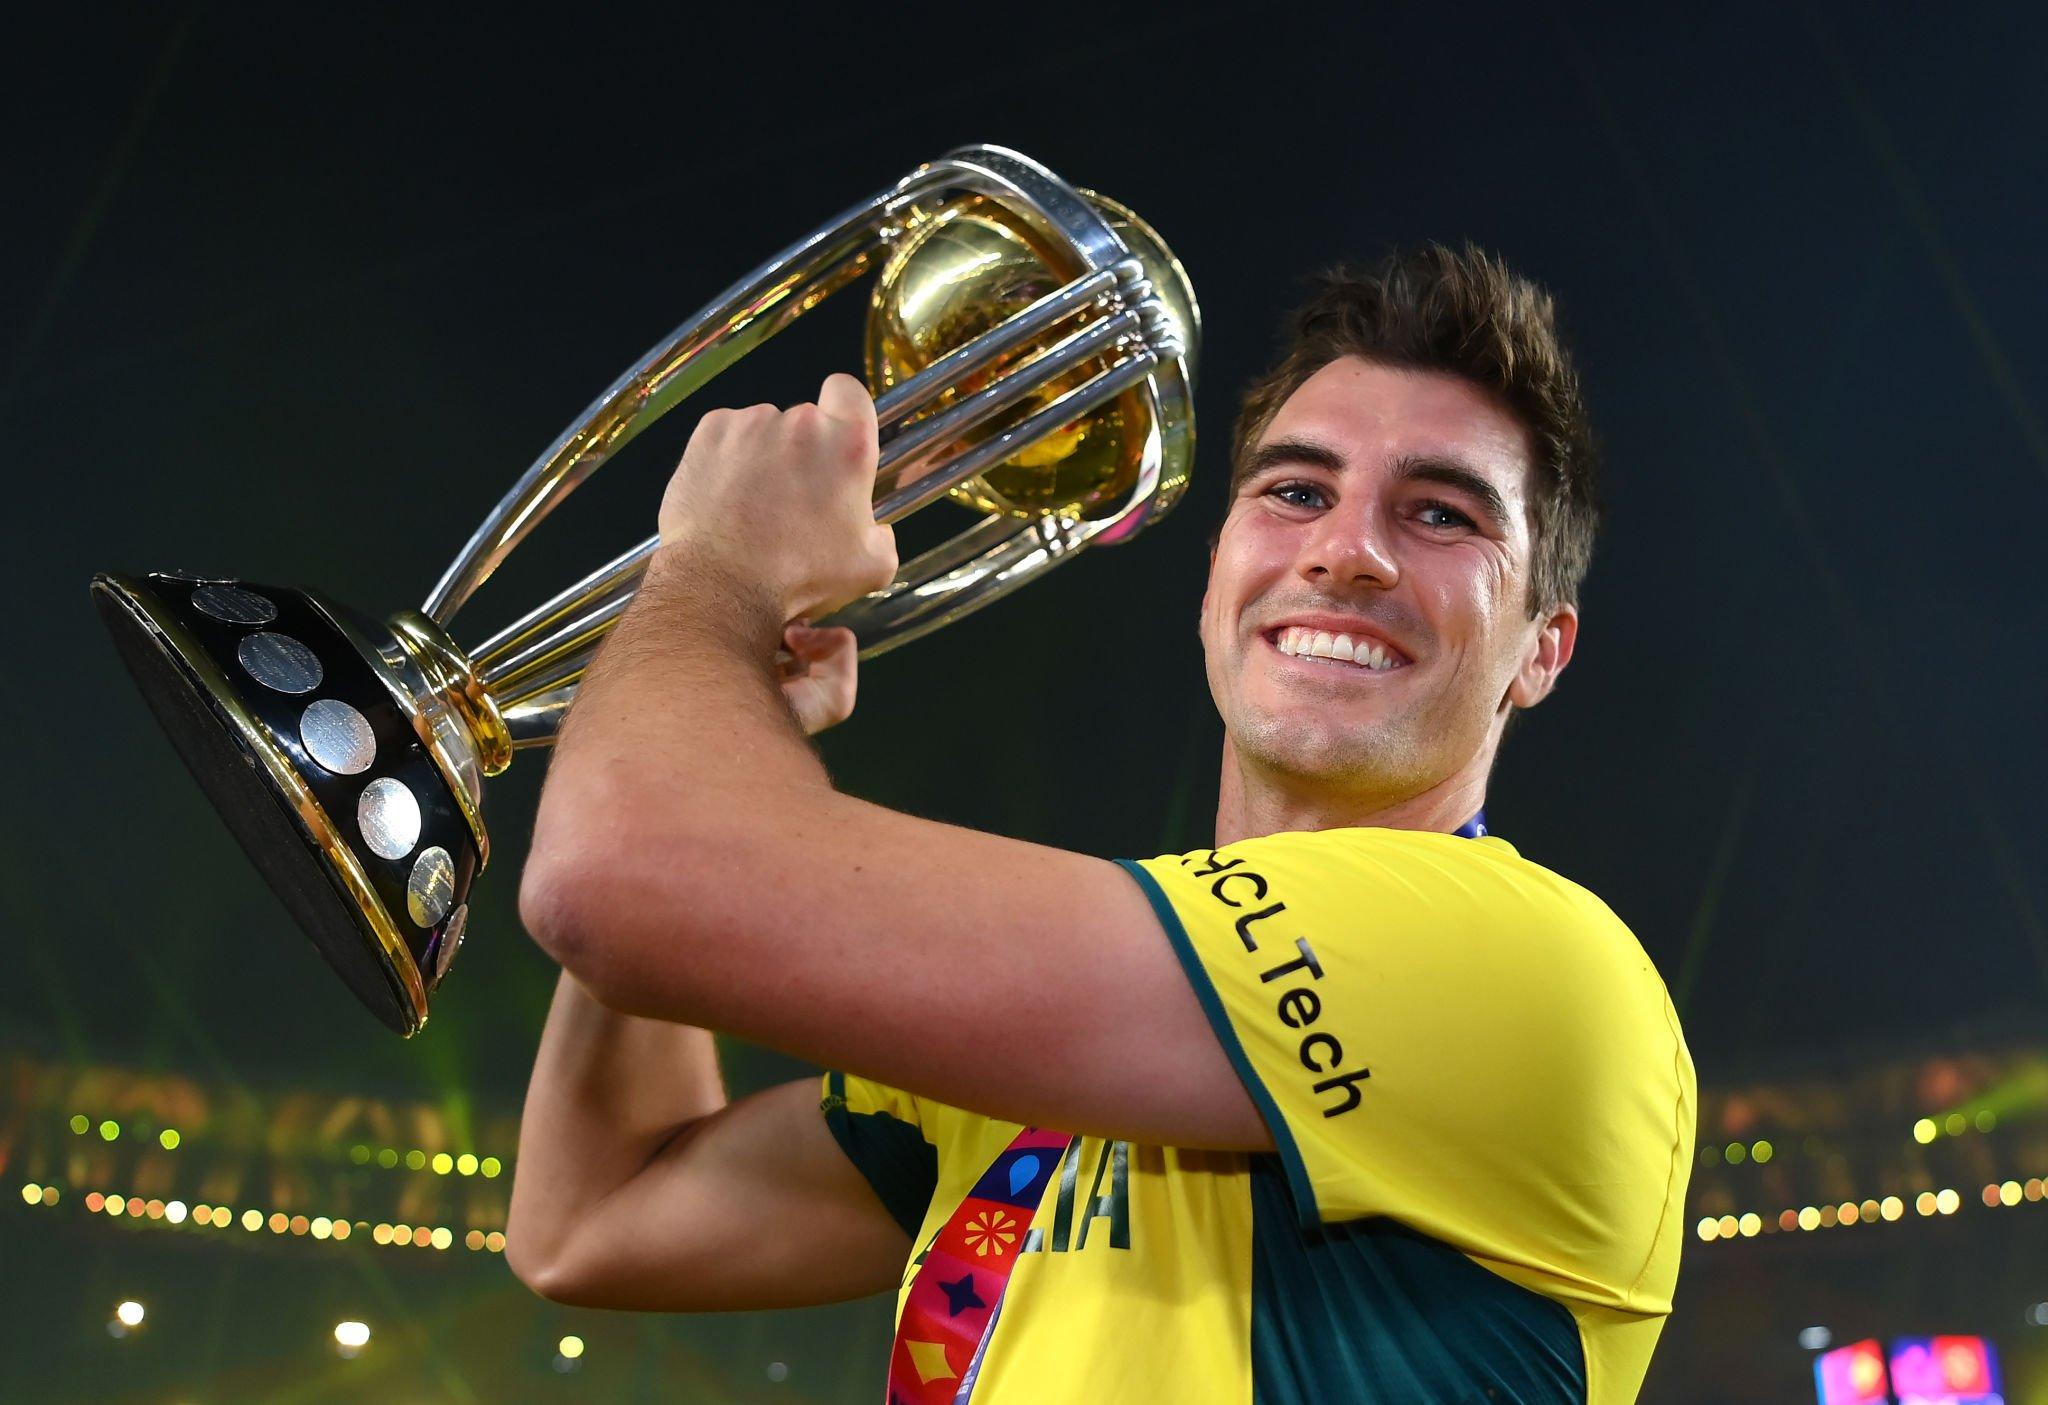 Australia's Dominance: Clinching Six Consecutive World Cup Titles with a Victory Over India